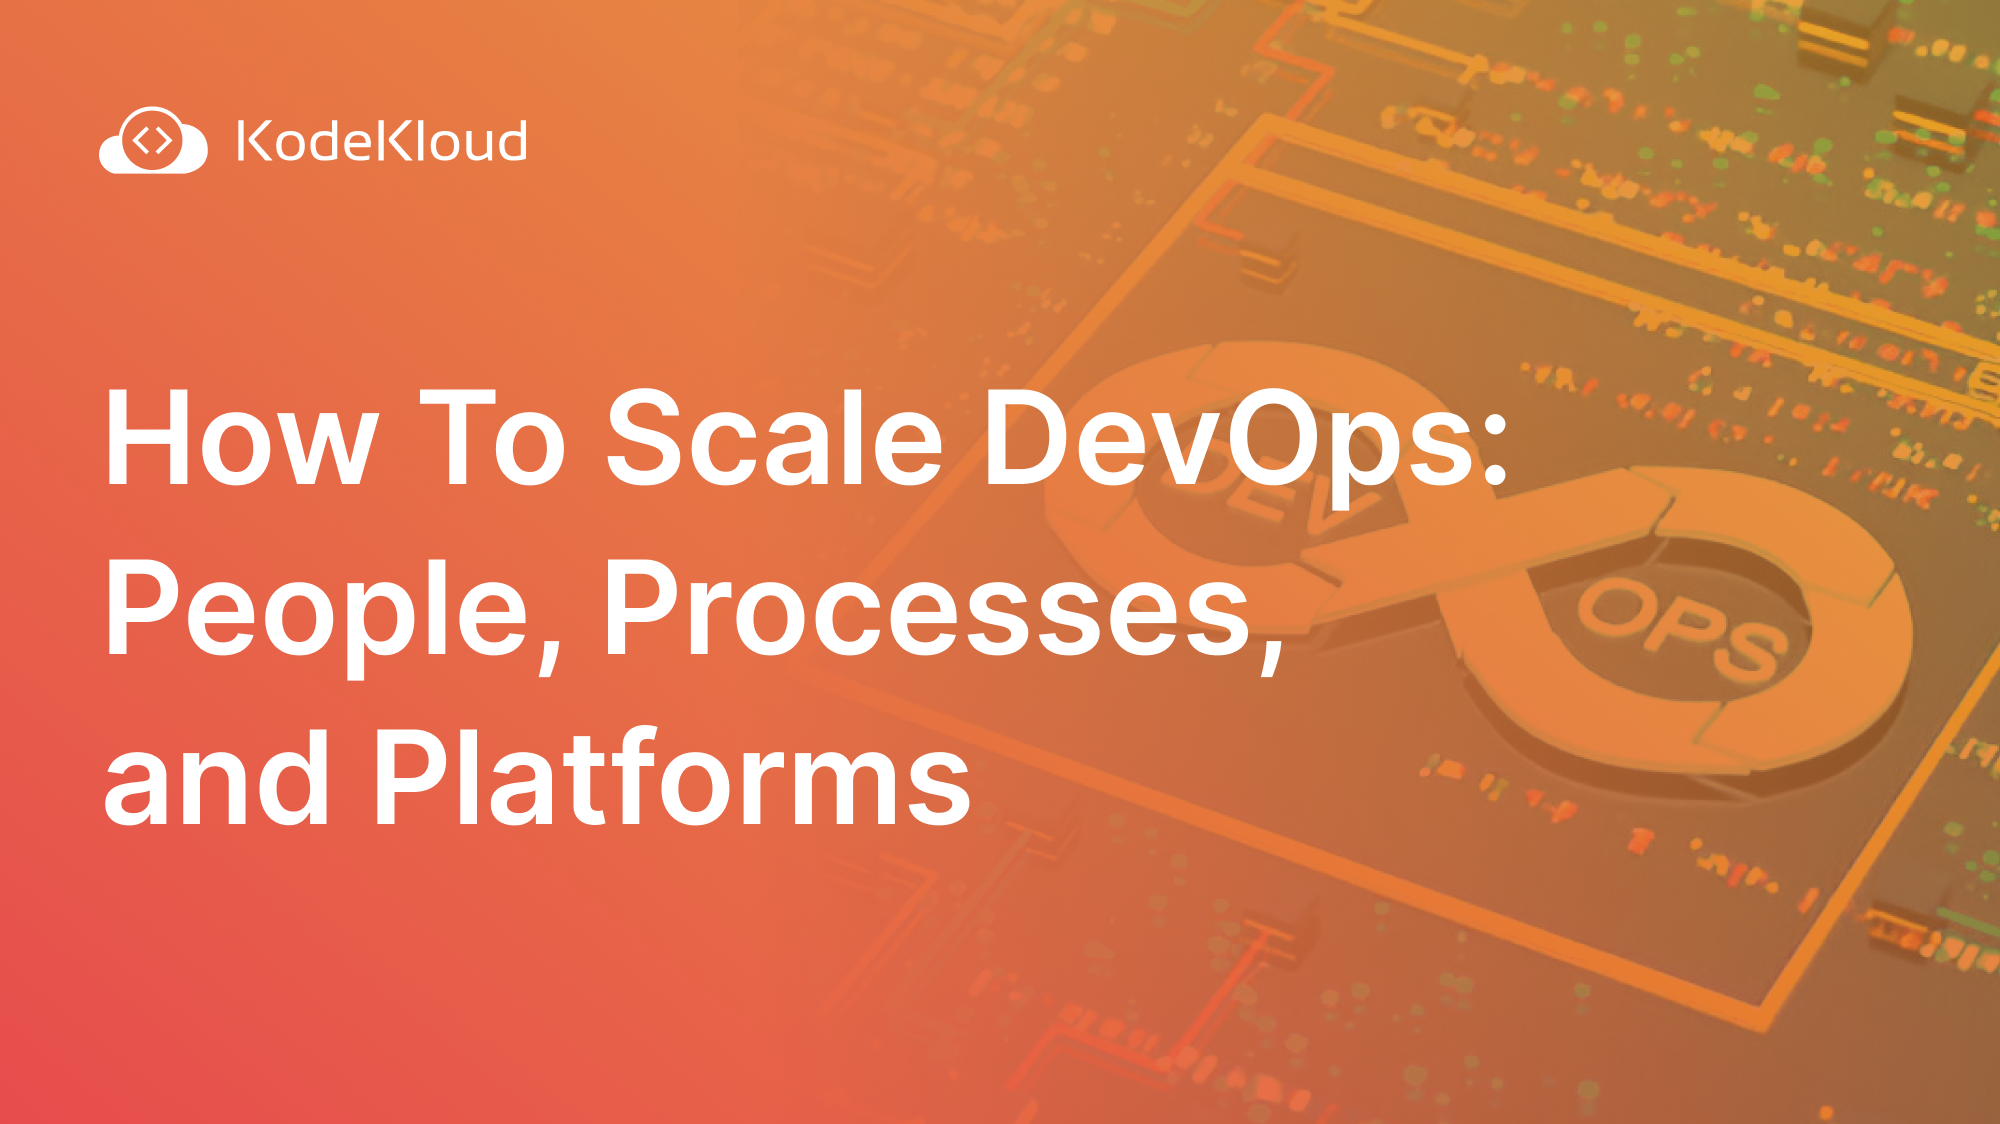 How To Scale DevOps: People, Processes, and Platforms